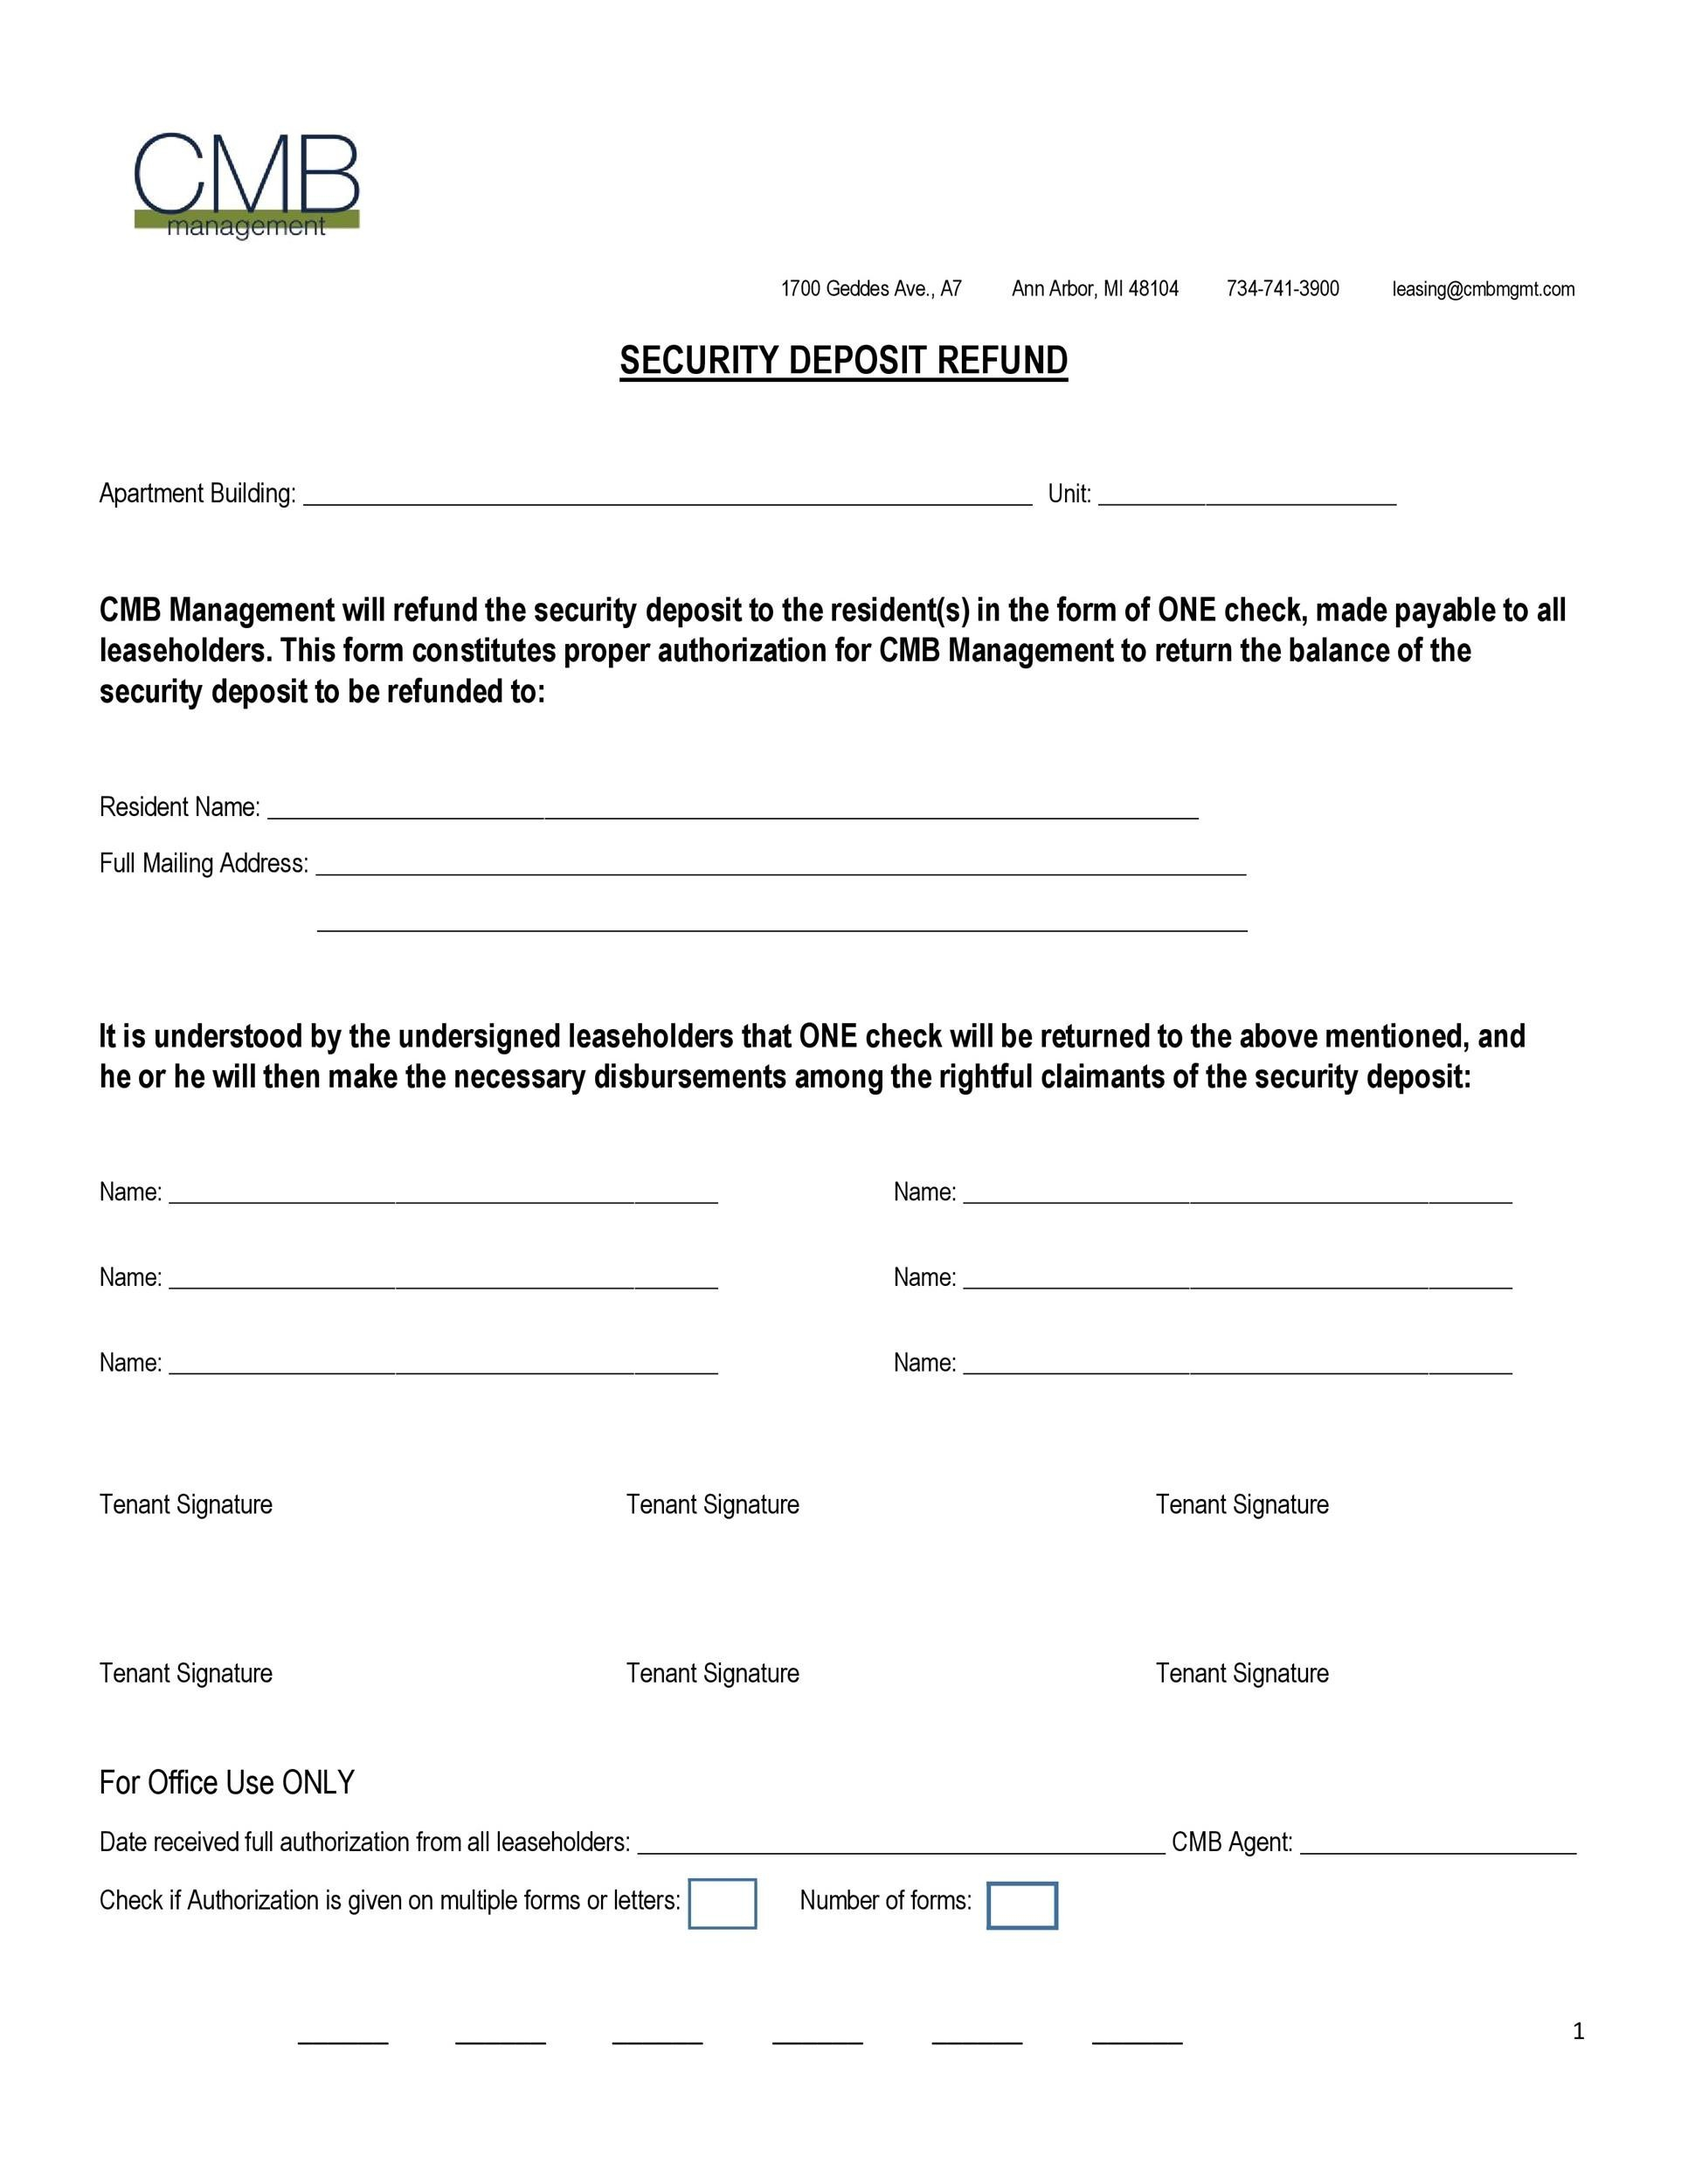 10 Effective Security Deposit Return Letters [MS Word] ᐅ TemplateLab With Return Of Security Deposit Form Letter For Return Of Security Deposit Form Letter